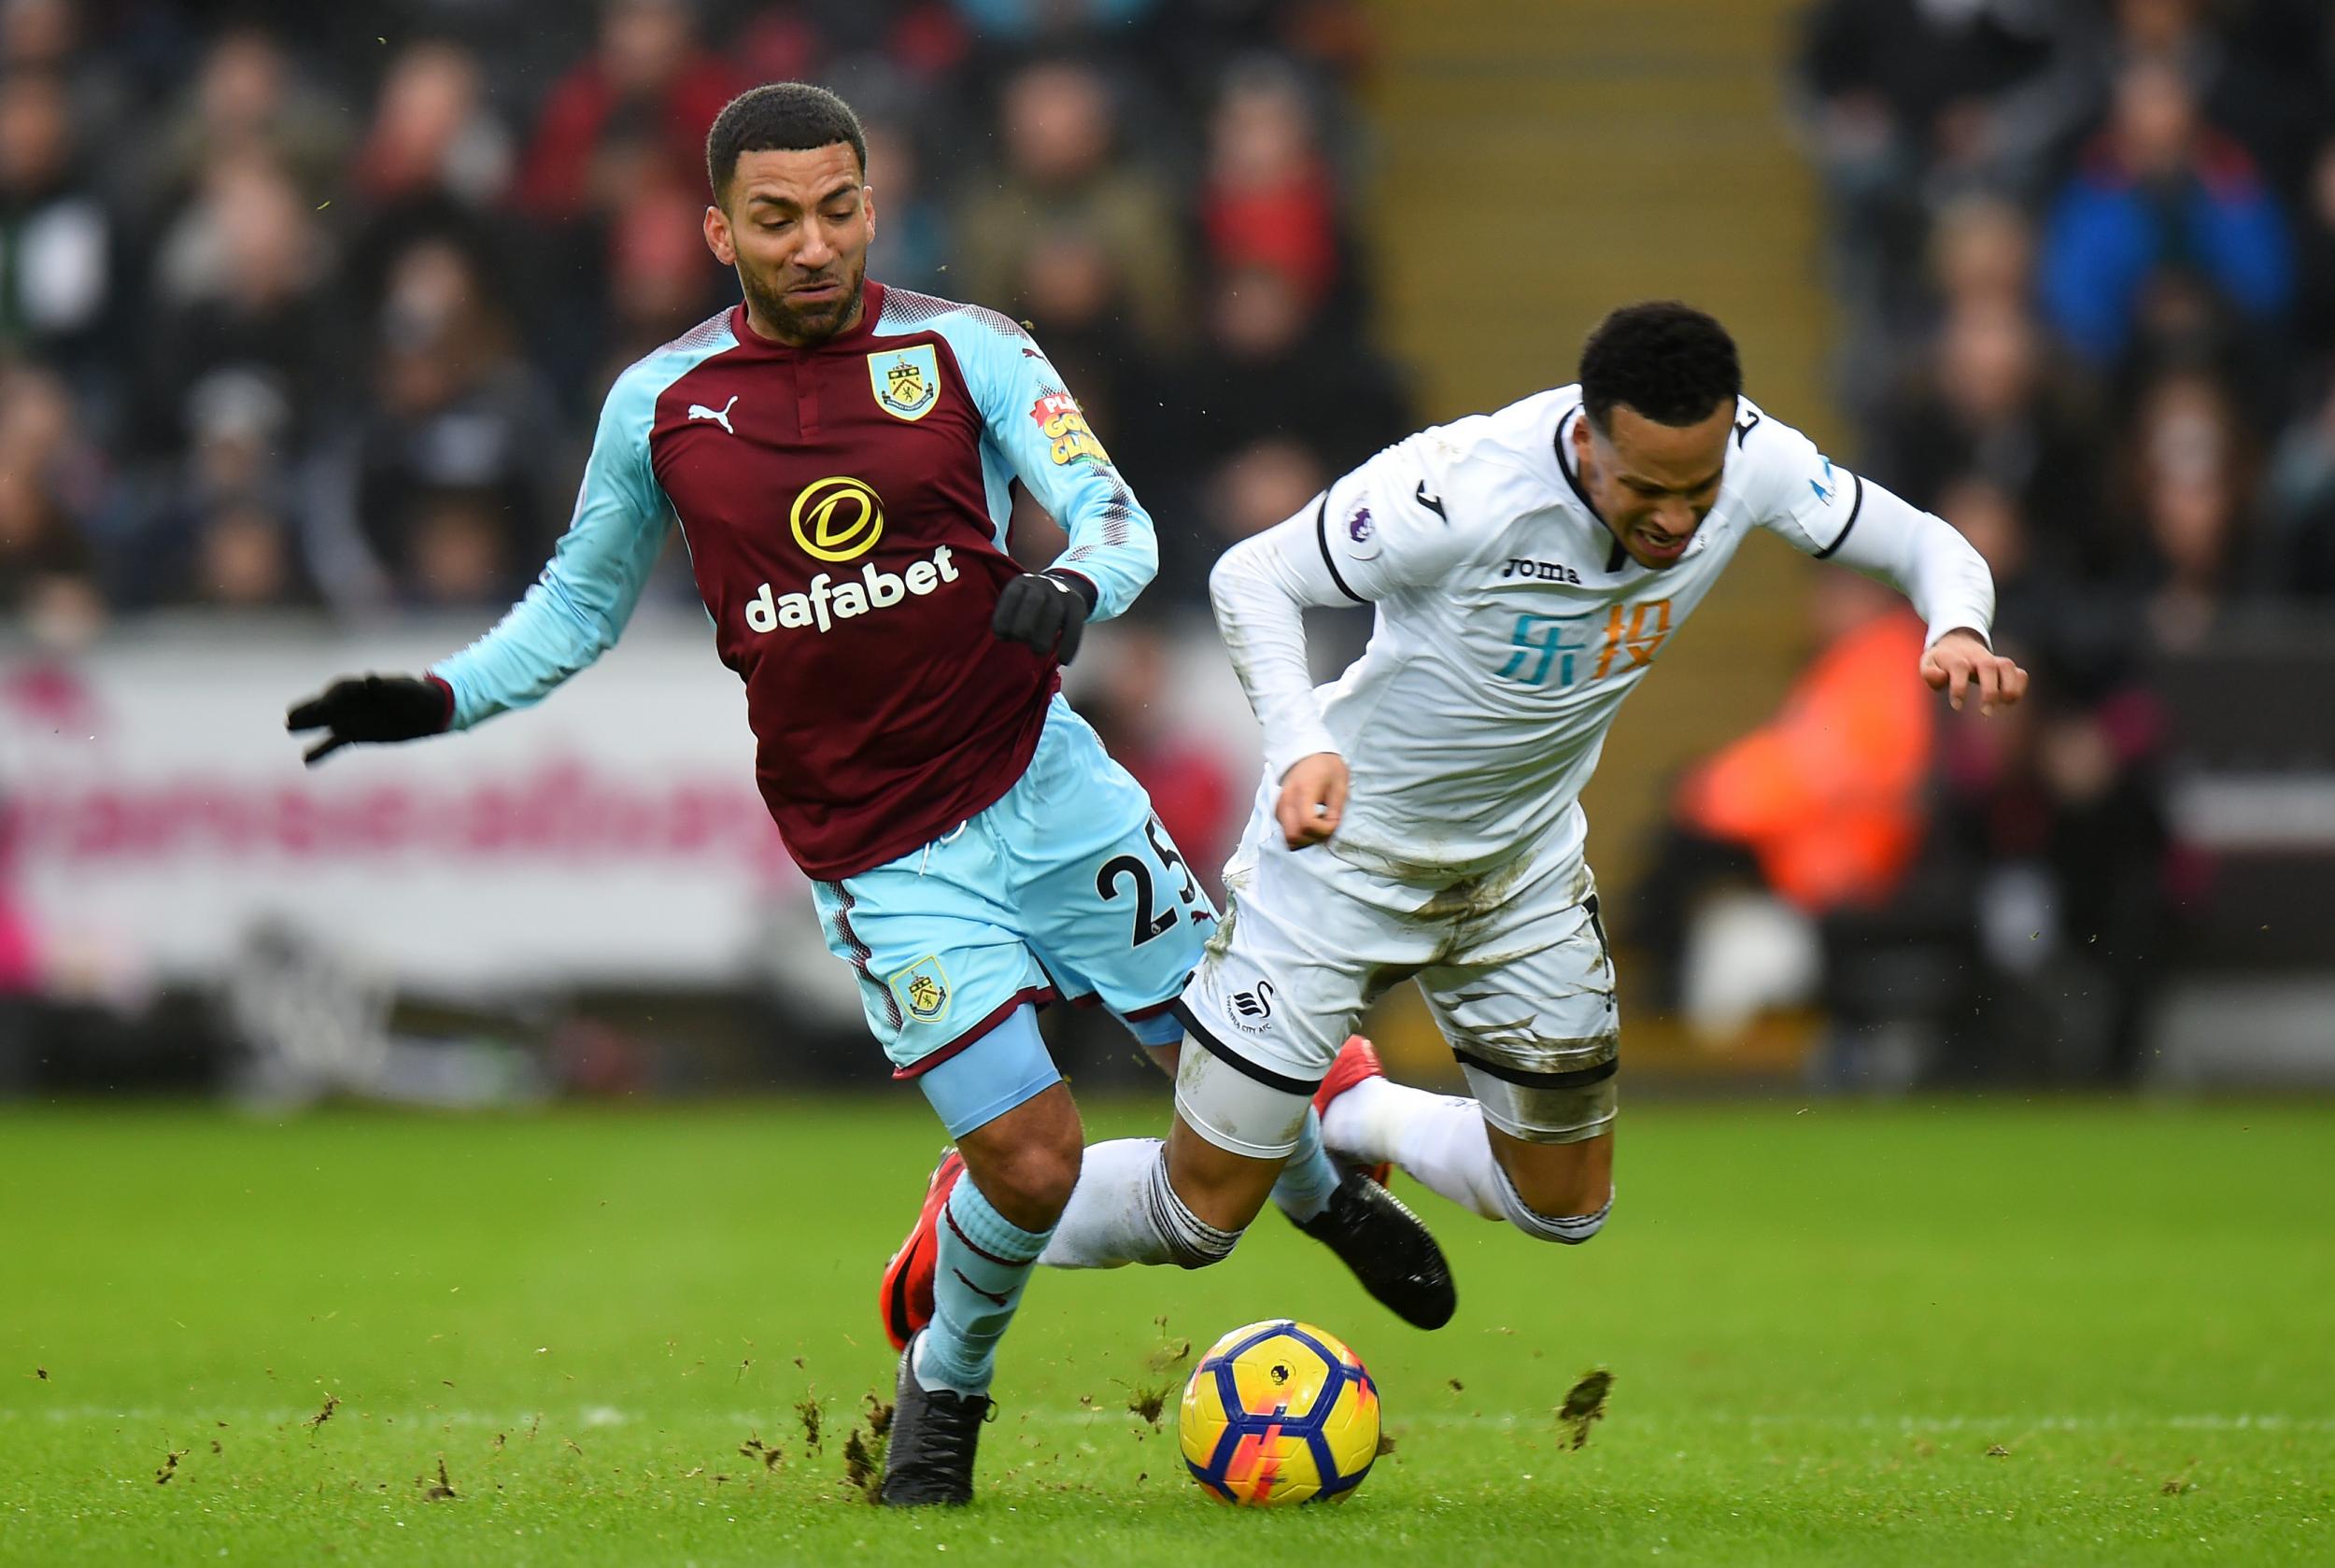 Lennon has showed flashes of quality at Burnley